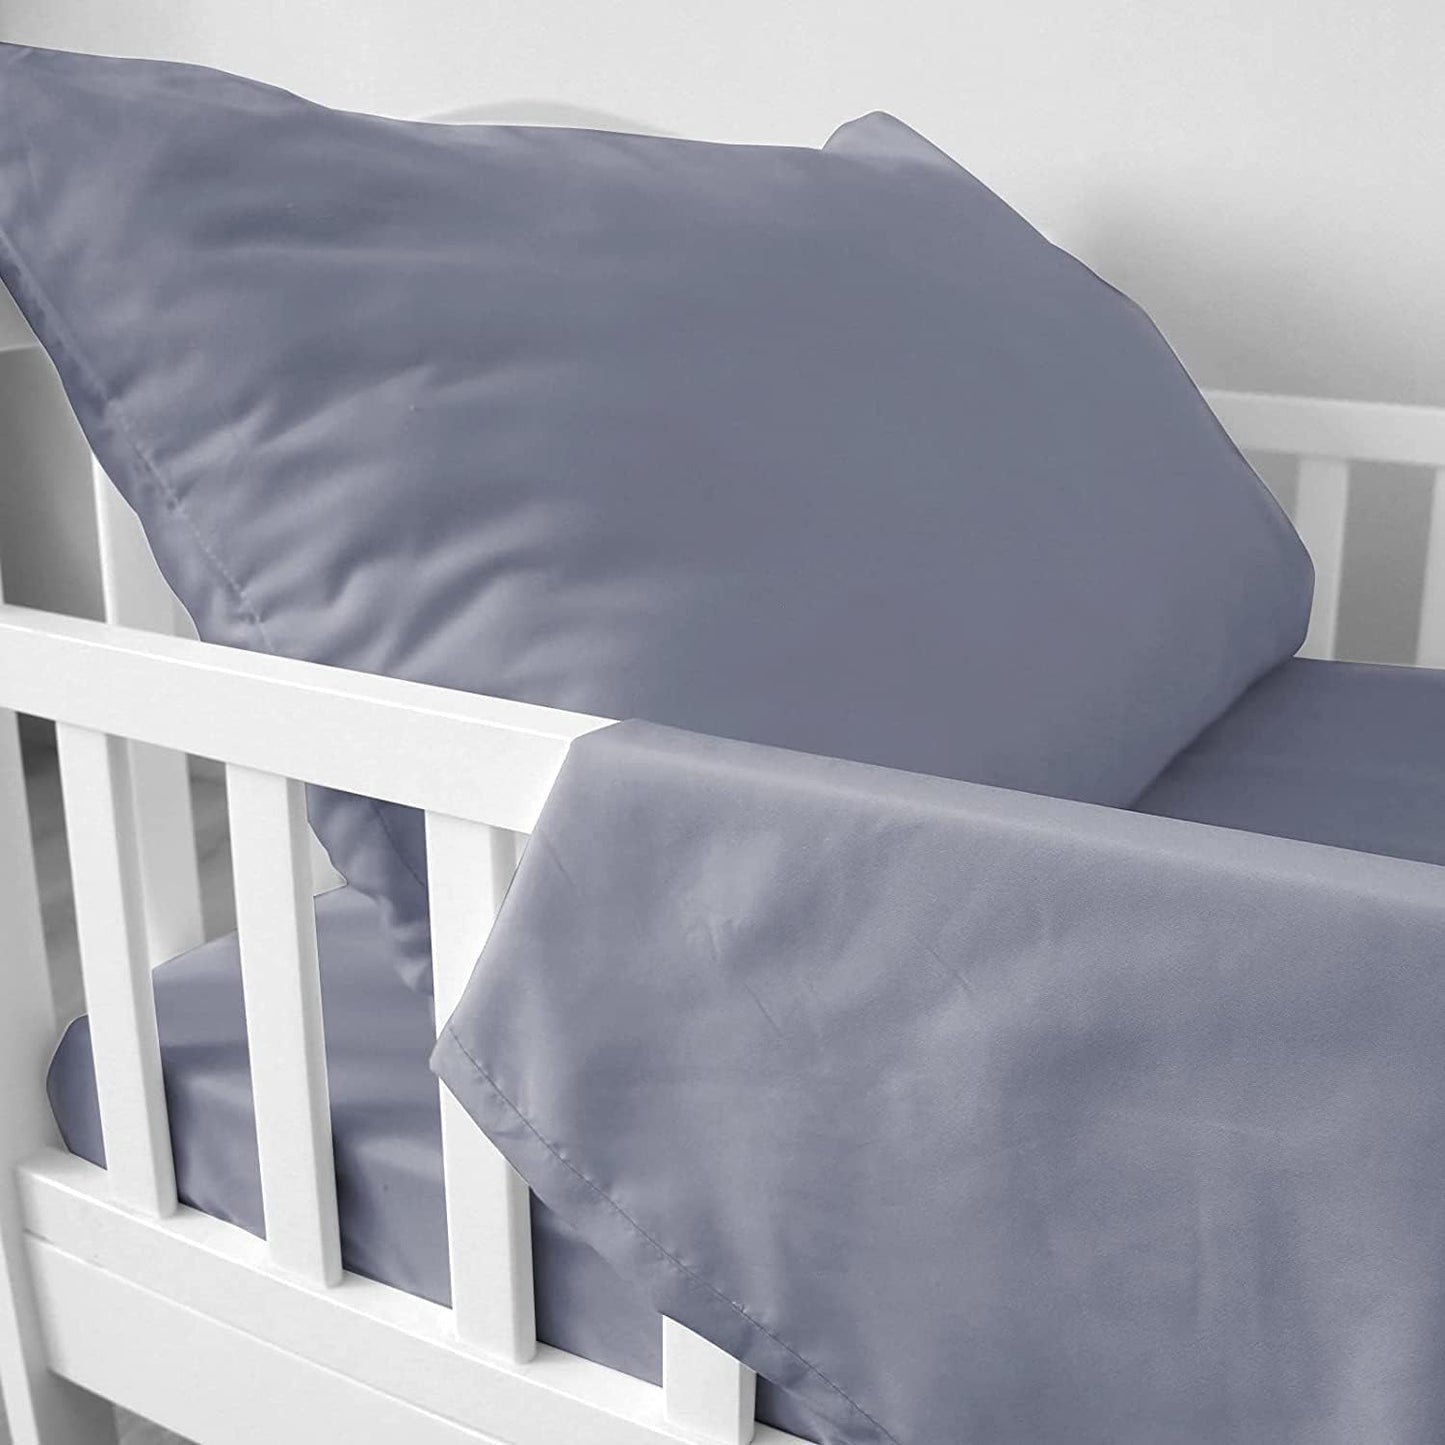 Toddler Bedding Set - 3 Pieces, Includes a Crib Fitted Sheet, Flat Sheet and Envelope Pillowcase, Soft and Breathable